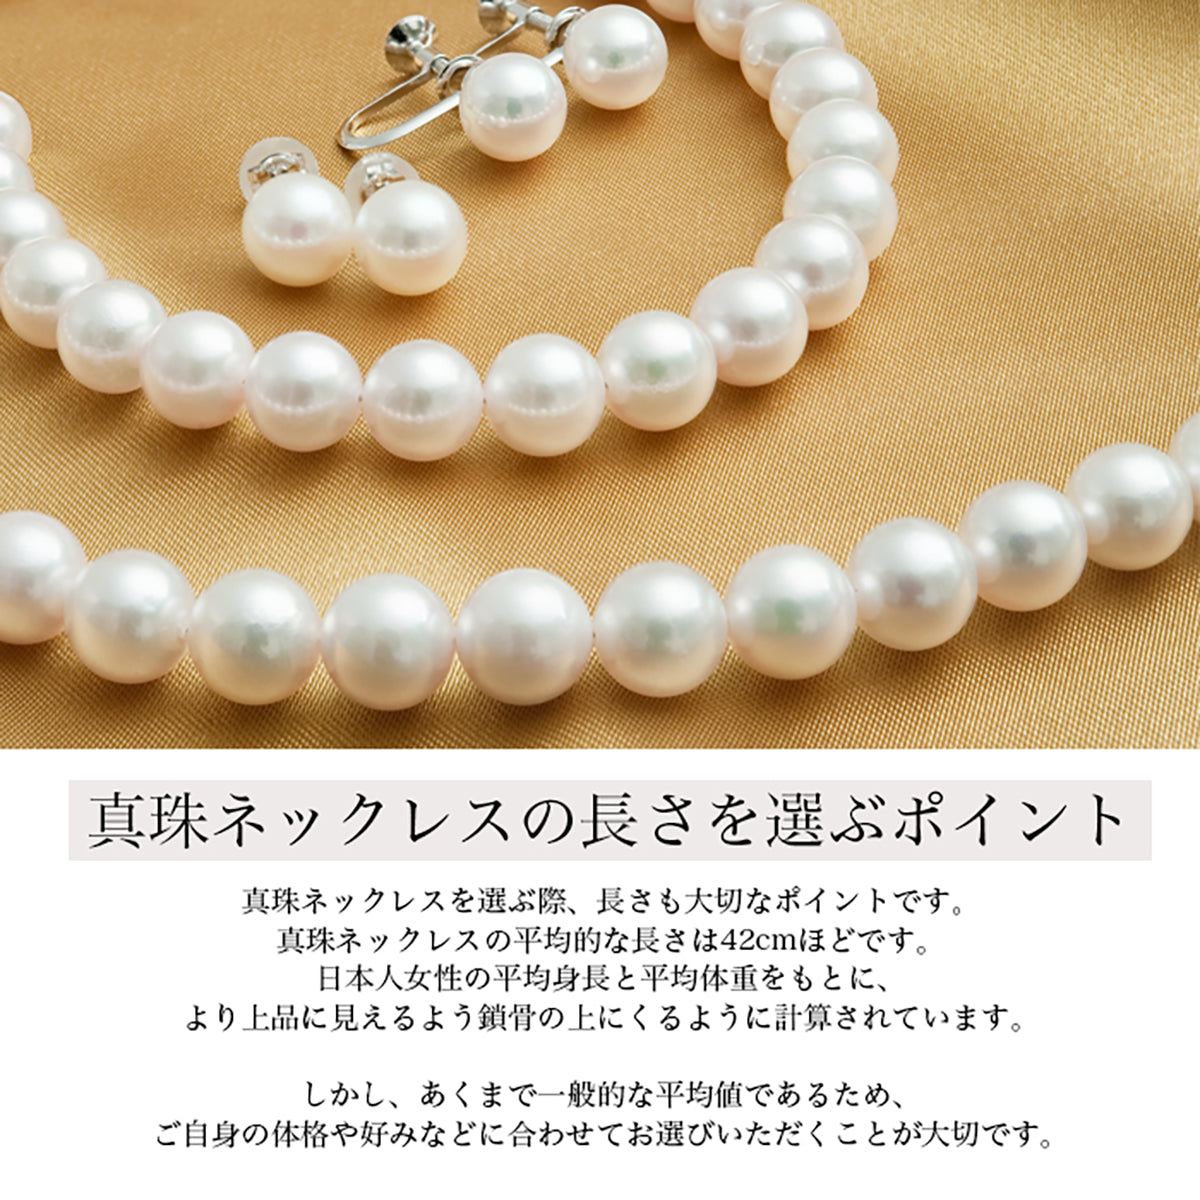 [Gray] Akoya pearl necklace formal 2-piece set [7.5-8.0mm] (Earrings included) For ceremonial occasions Certificate of authenticity and storage case included [Limited quantity]